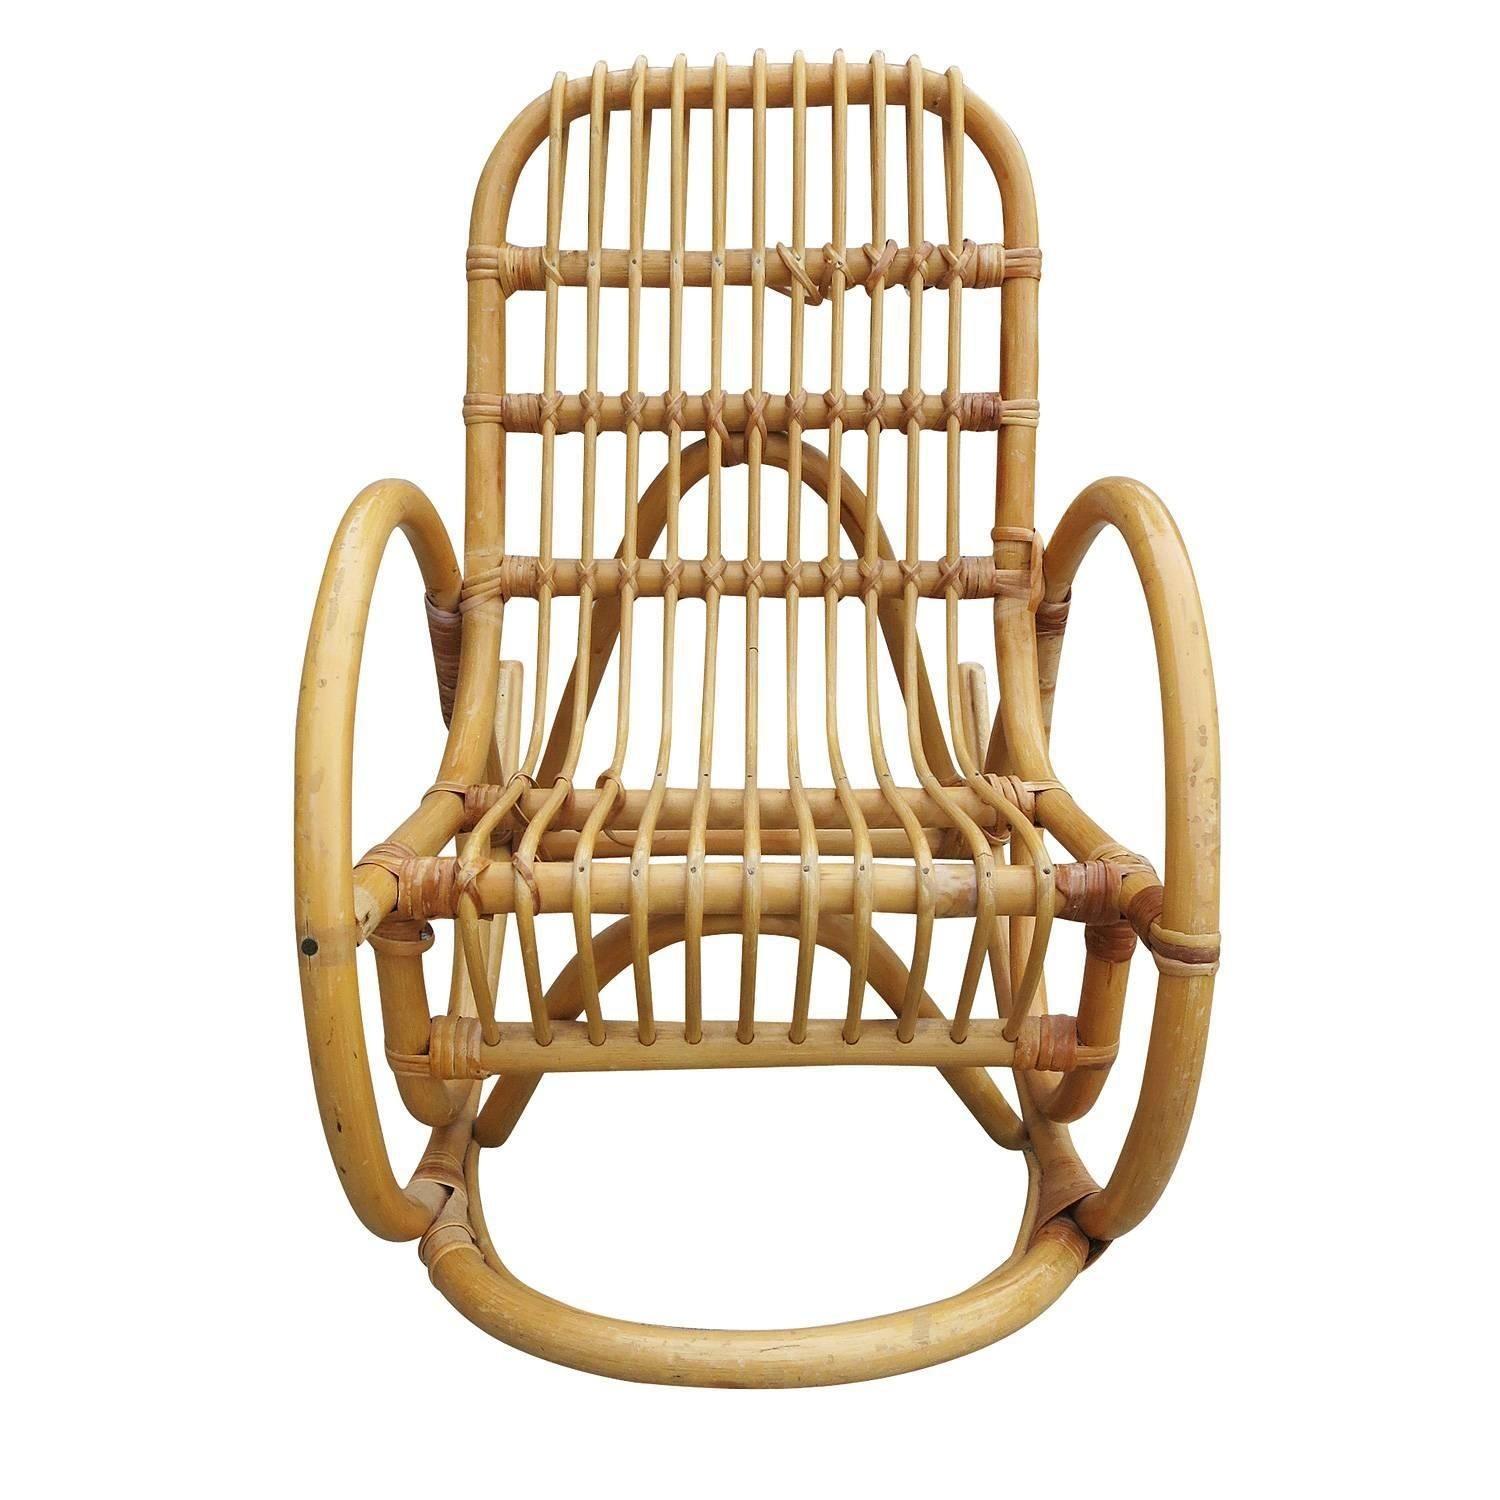 Restored Vintage Rare Snake Arm Rattan Children's Rocking Chair In Excellent Condition For Sale In Van Nuys, CA